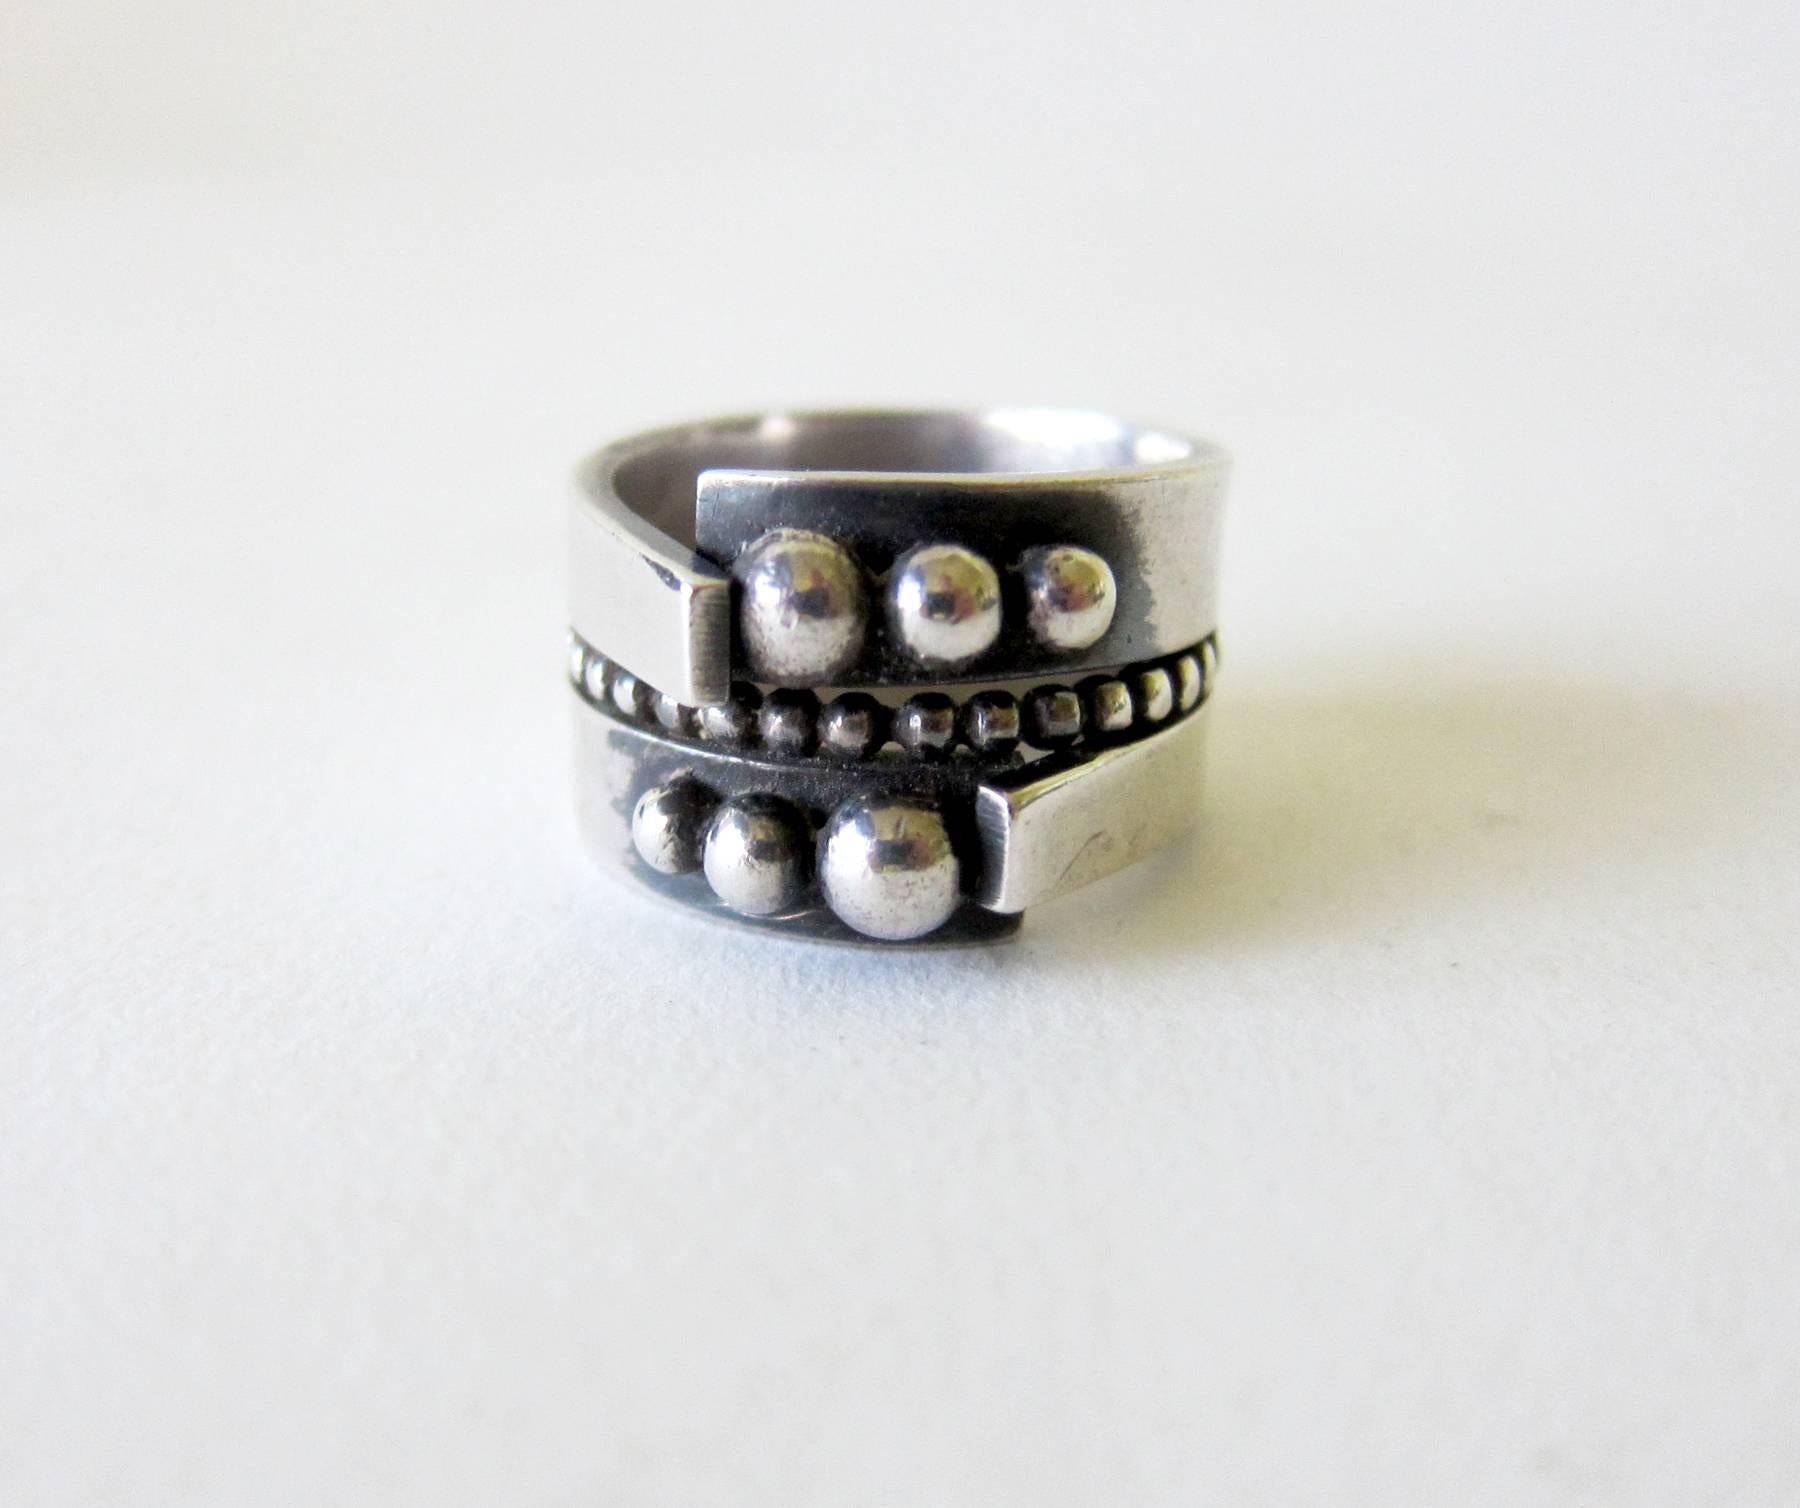 A very involved sterling silver ring with ball decoration on face and around the shank creat by James Parker of San Diego, California.  Ring is a finger size 8, shank measures 1/2